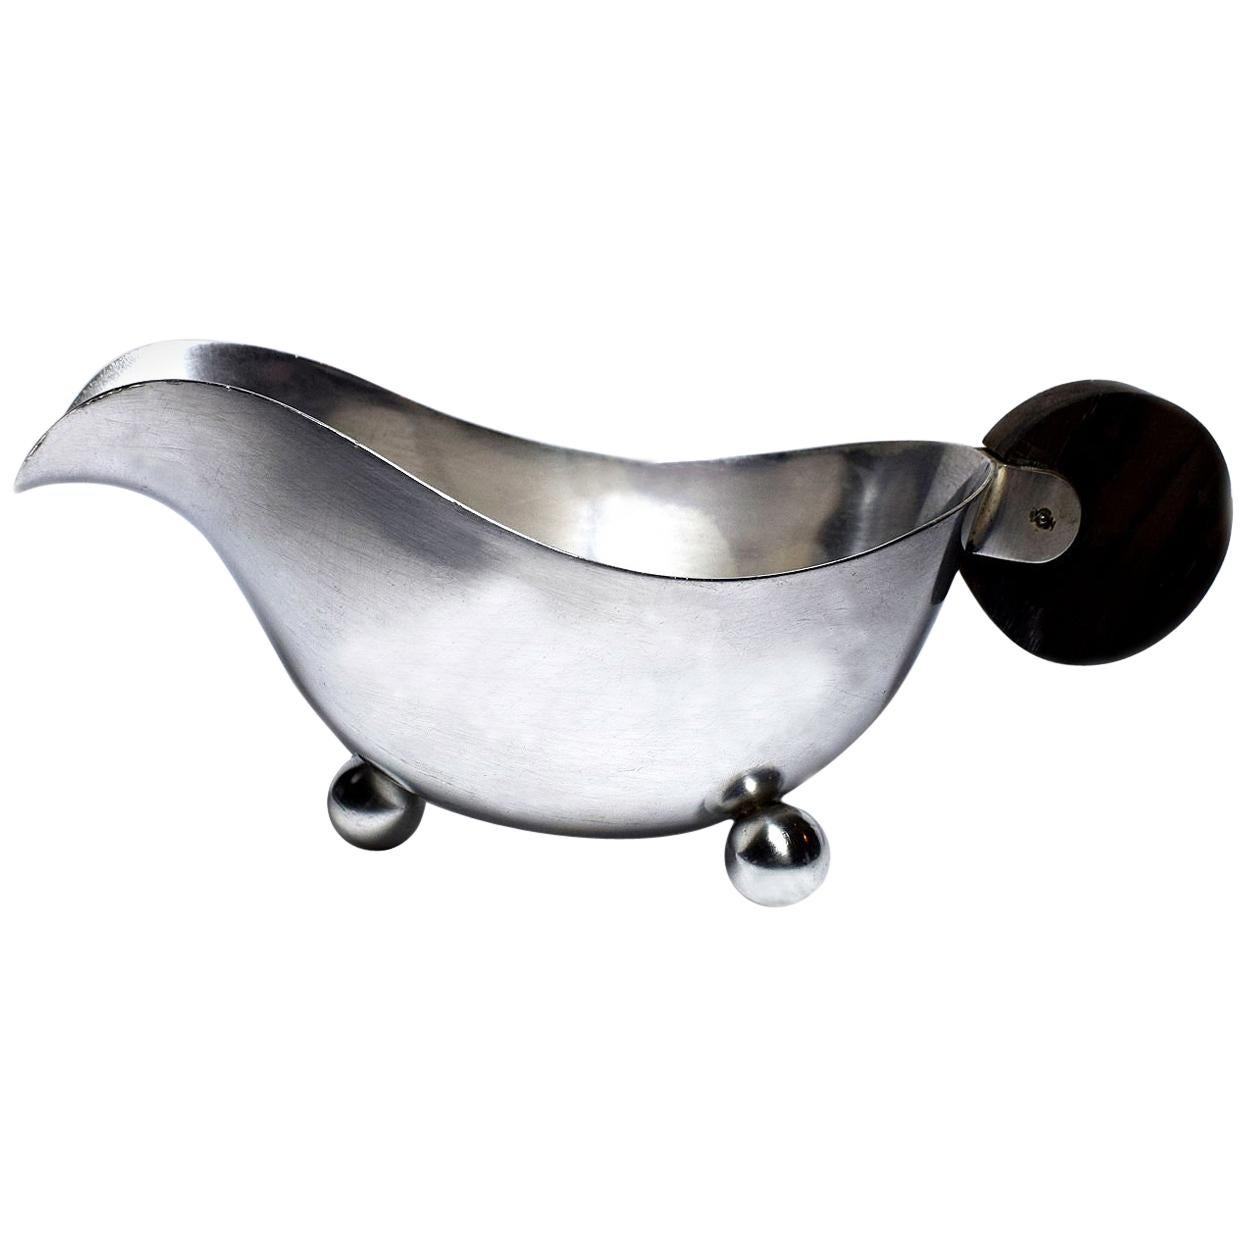 Art Deco Modernist Silver Plated Sauce Boat For Sale